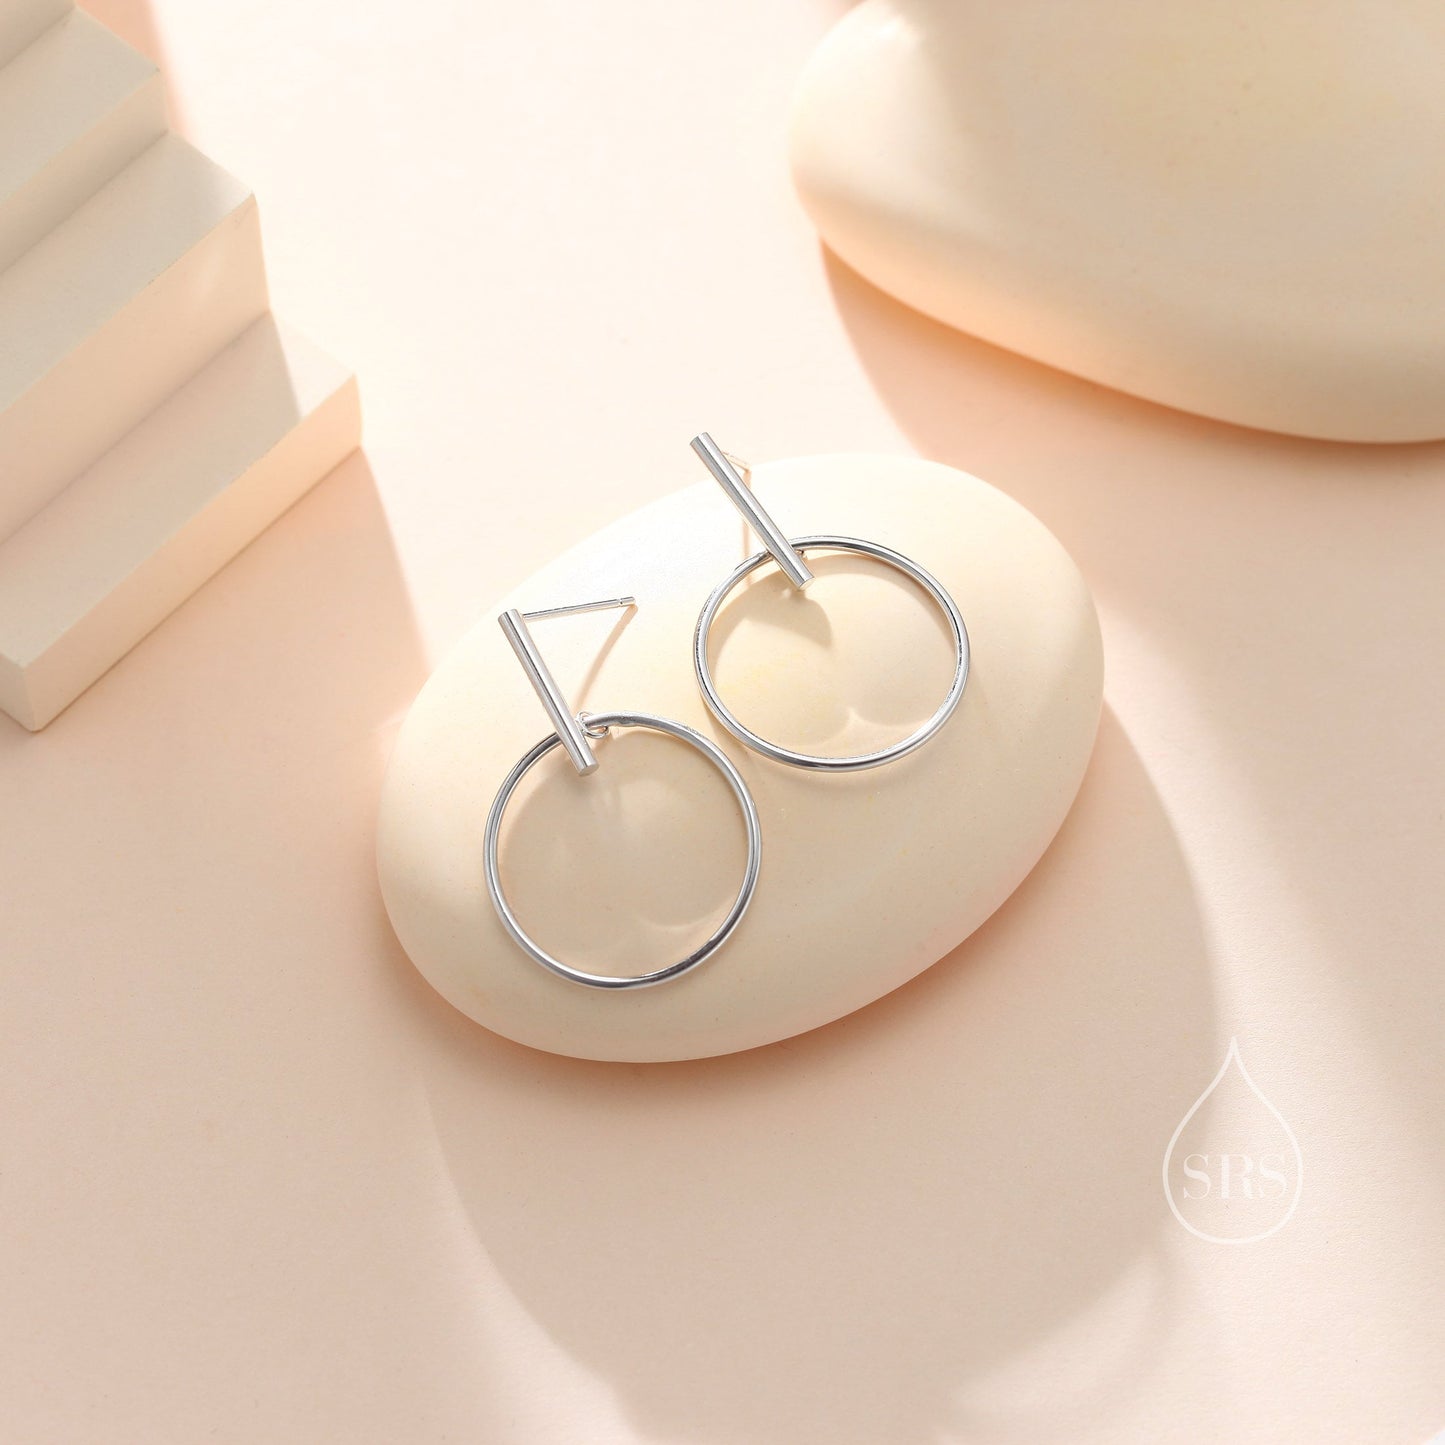 Large Dangle Circle and Bar Stud Earrings in Sterling Silver, Silver, Gold or Rose Gold, Geometric Circle Dangle Earrings